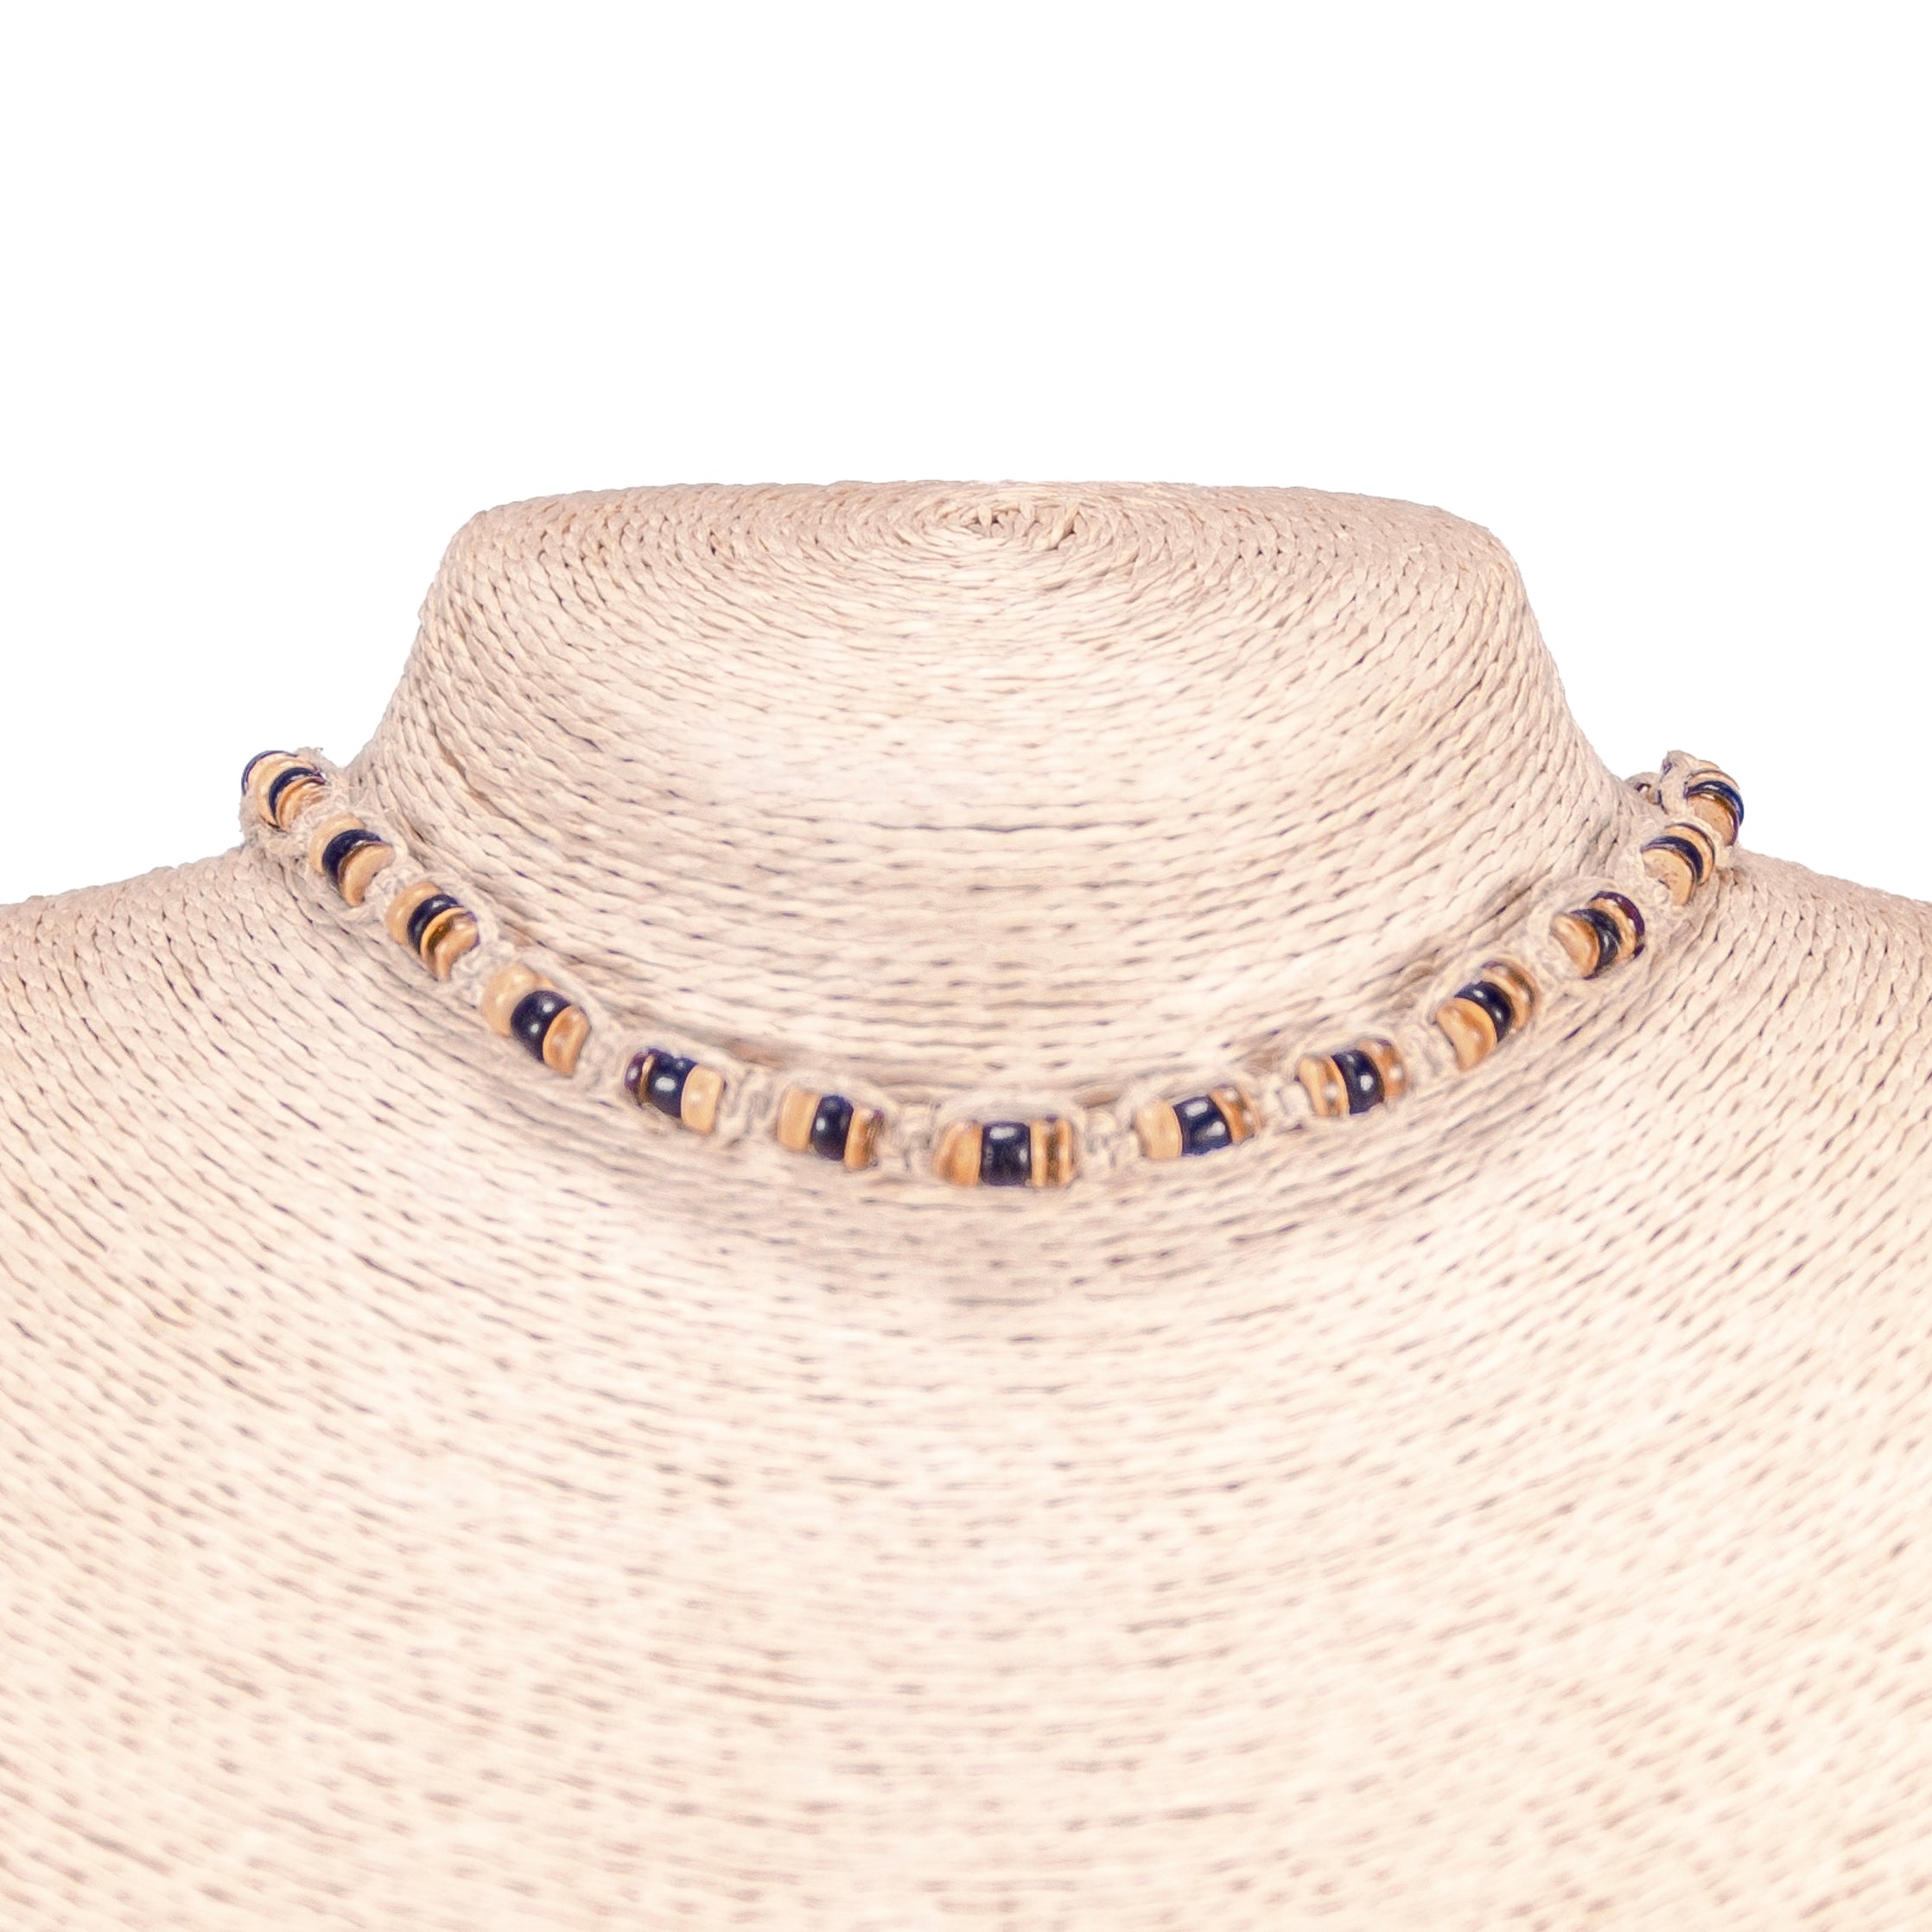 Tiger Brown and Black Coconut Beads on Hemp Choker Necklace